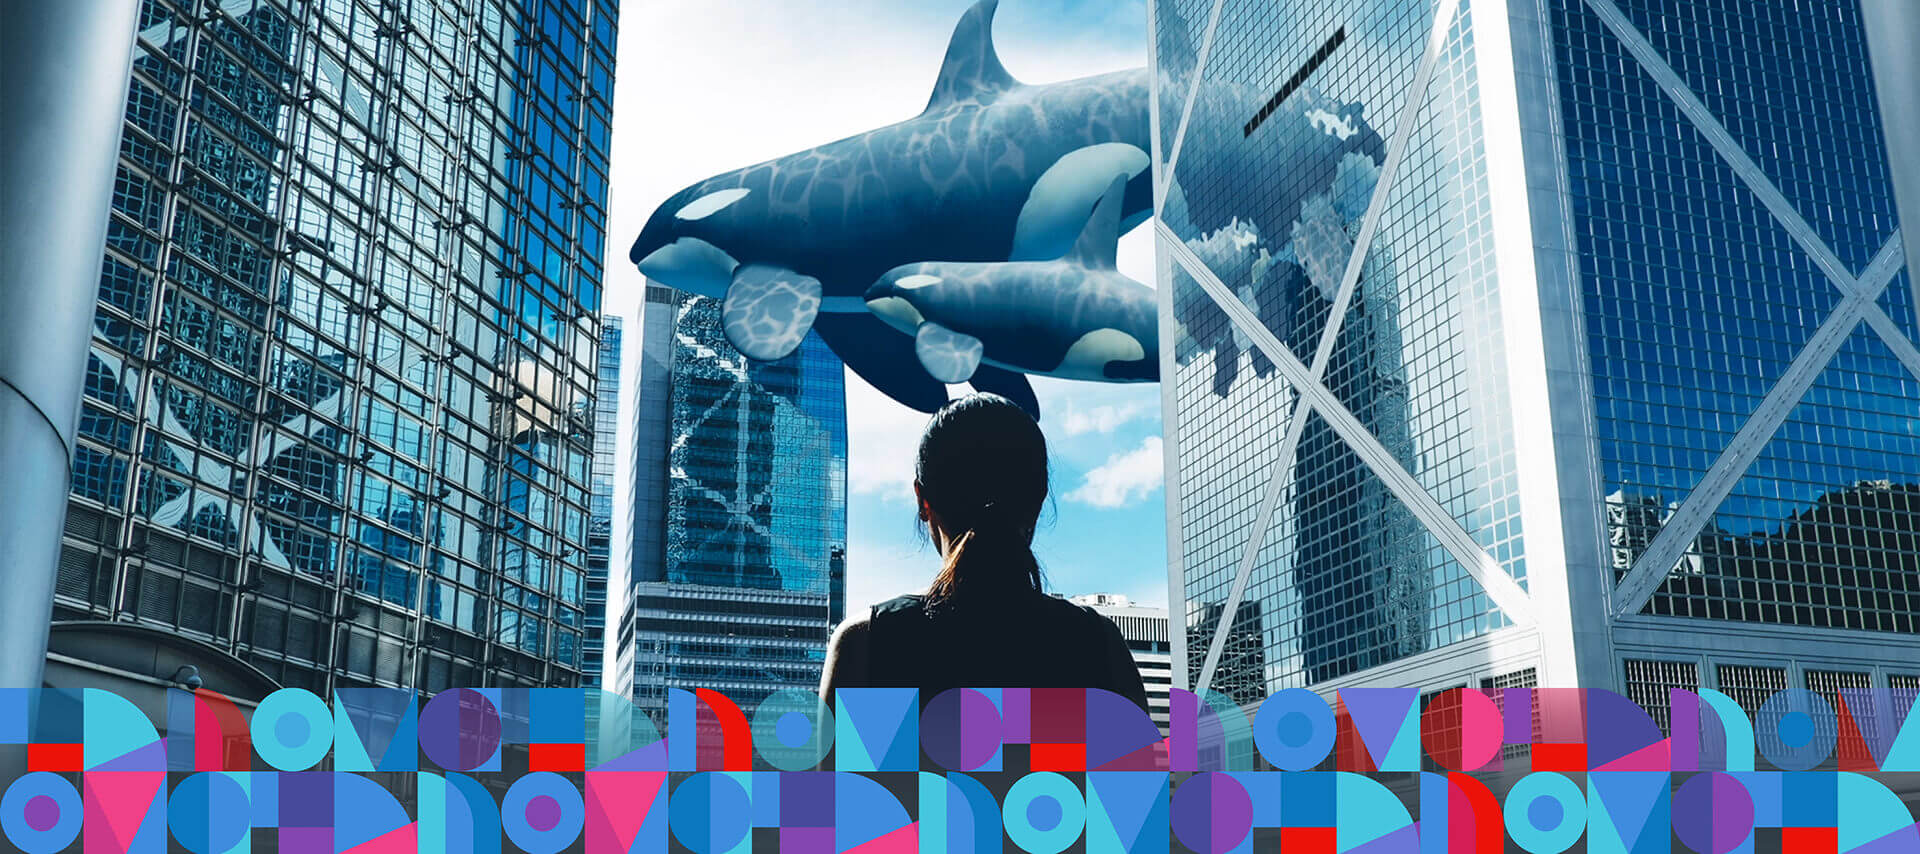 A woman stands among skyscrapers watching orca whales in the sky